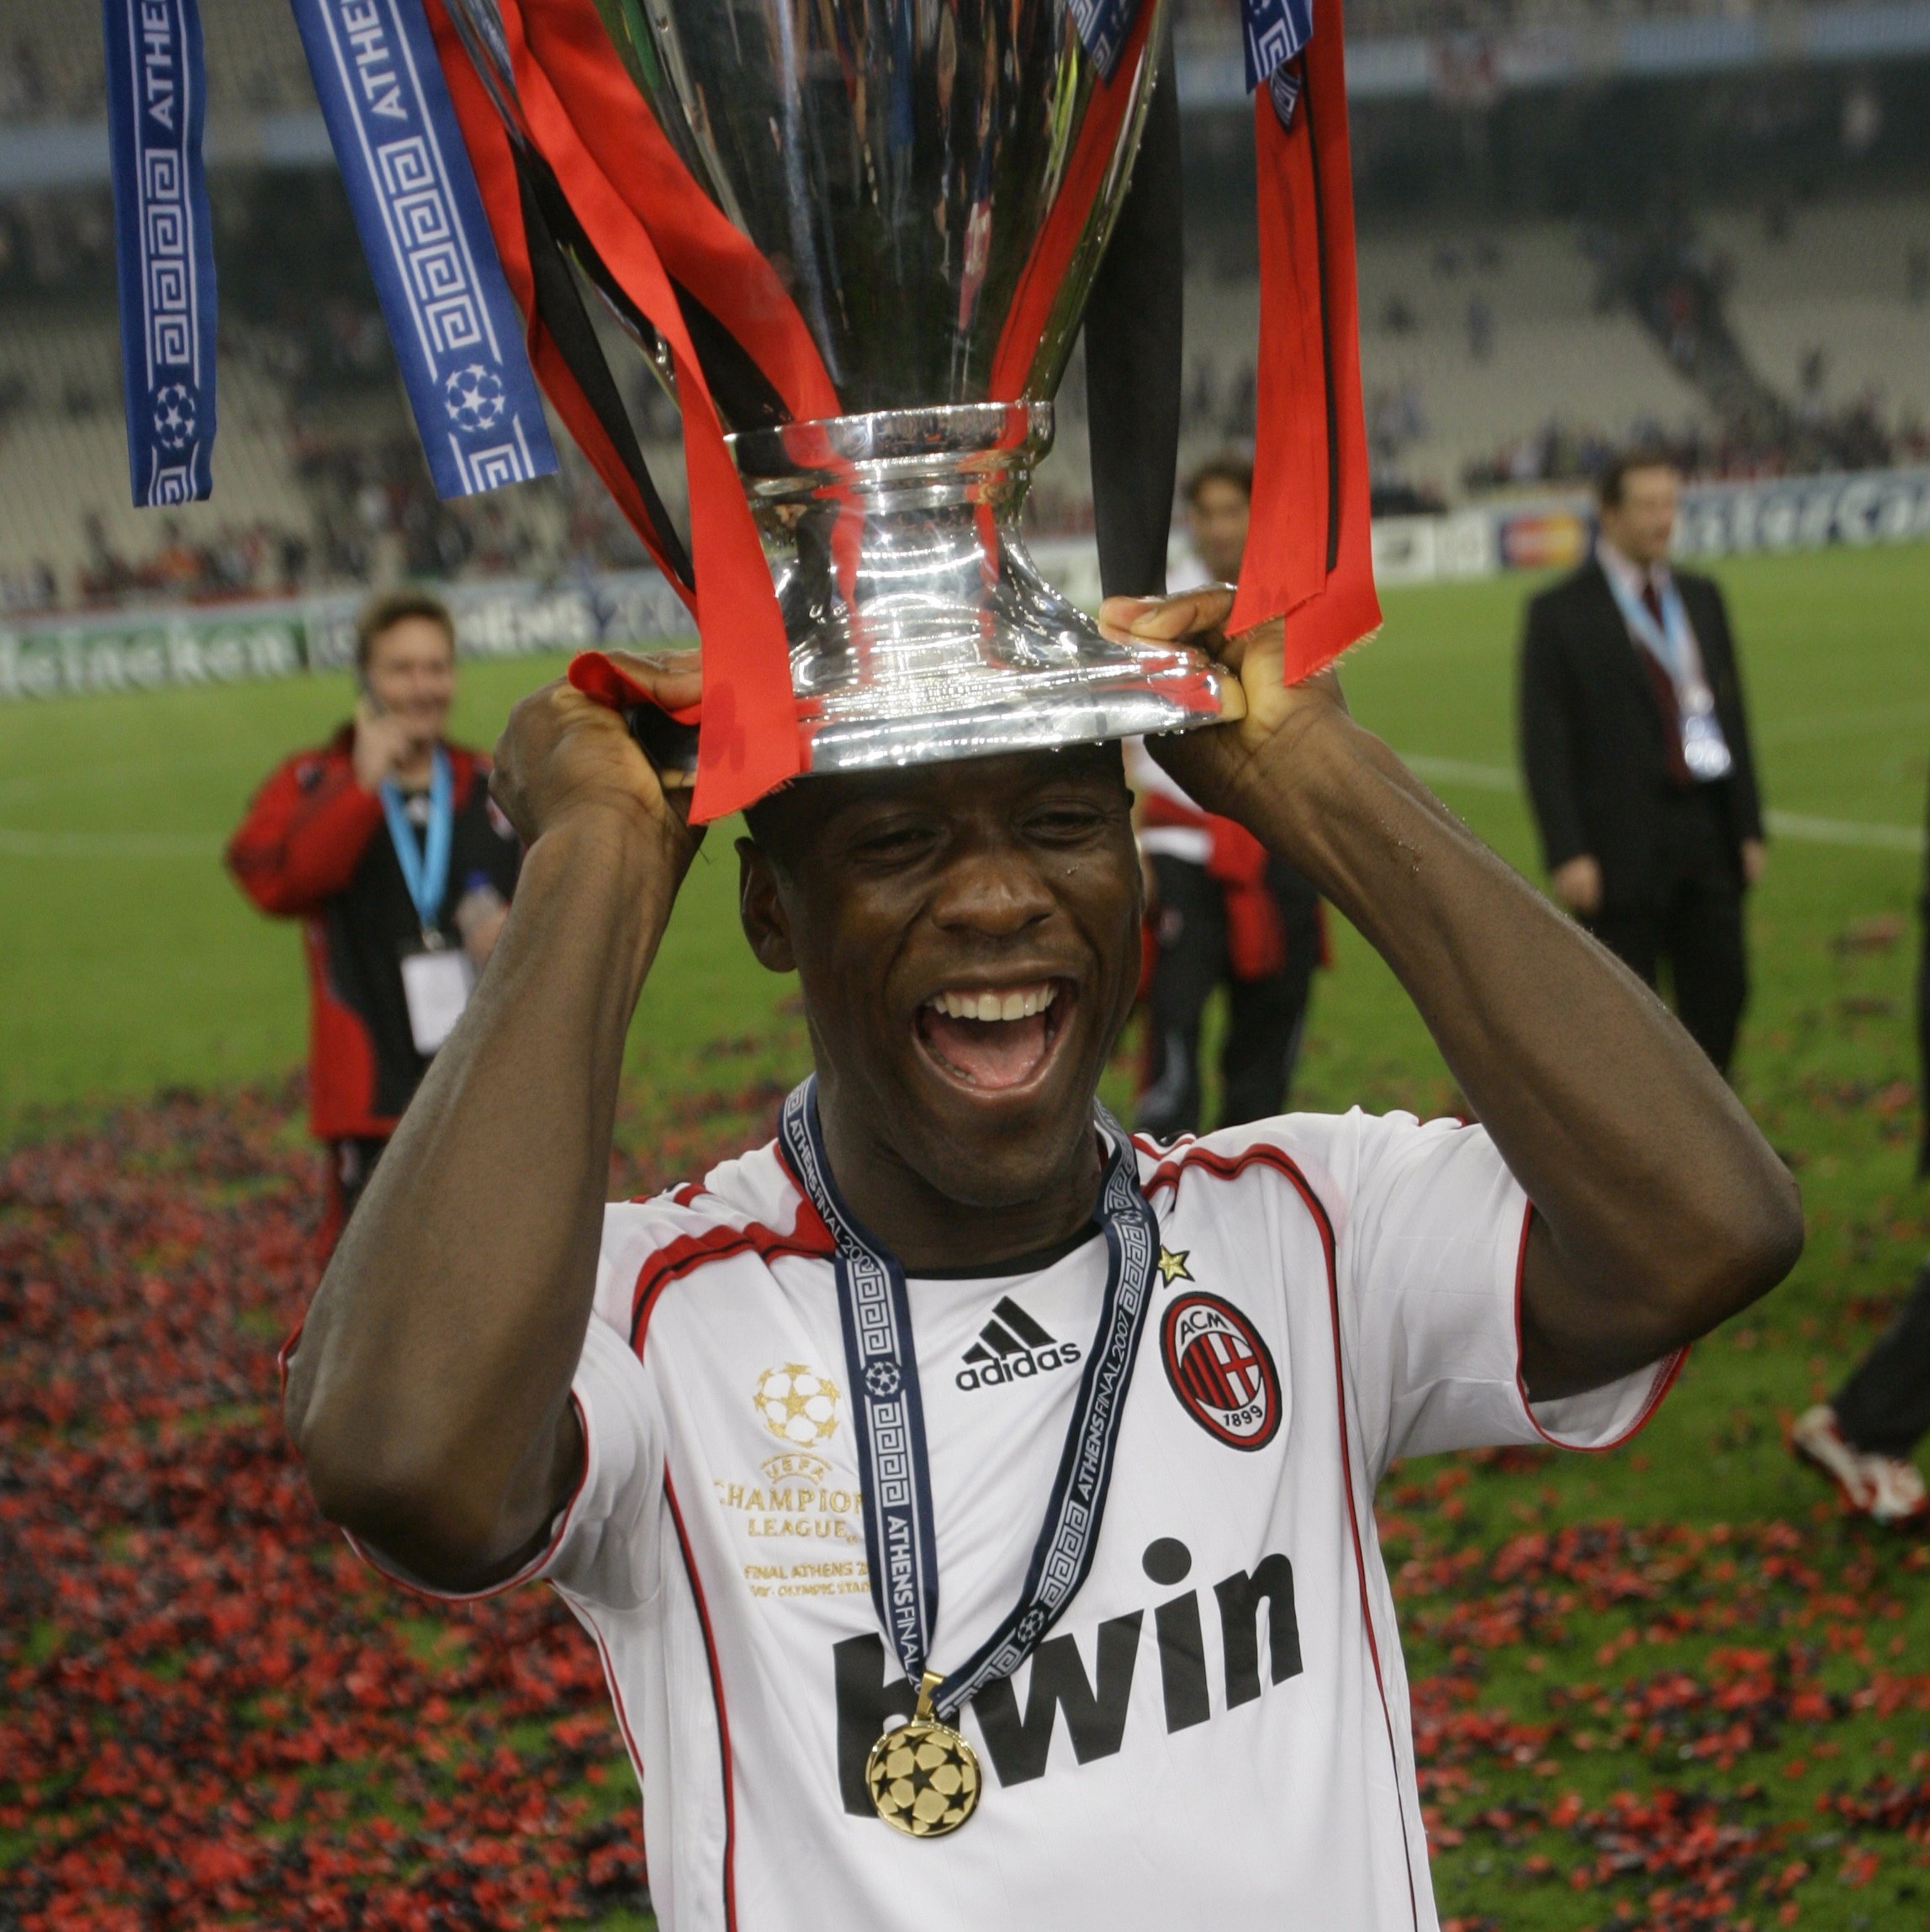 Football Tweet ⚽ on X: Clarence Seedorf is the only player who has won  the Champions League with 3 different clubs! • 🇳🇱 Ajax (1995) • 🇪🇸 Real  Madrid (1998) • 🇮🇹 AC Milan (2003, 2007)  / X